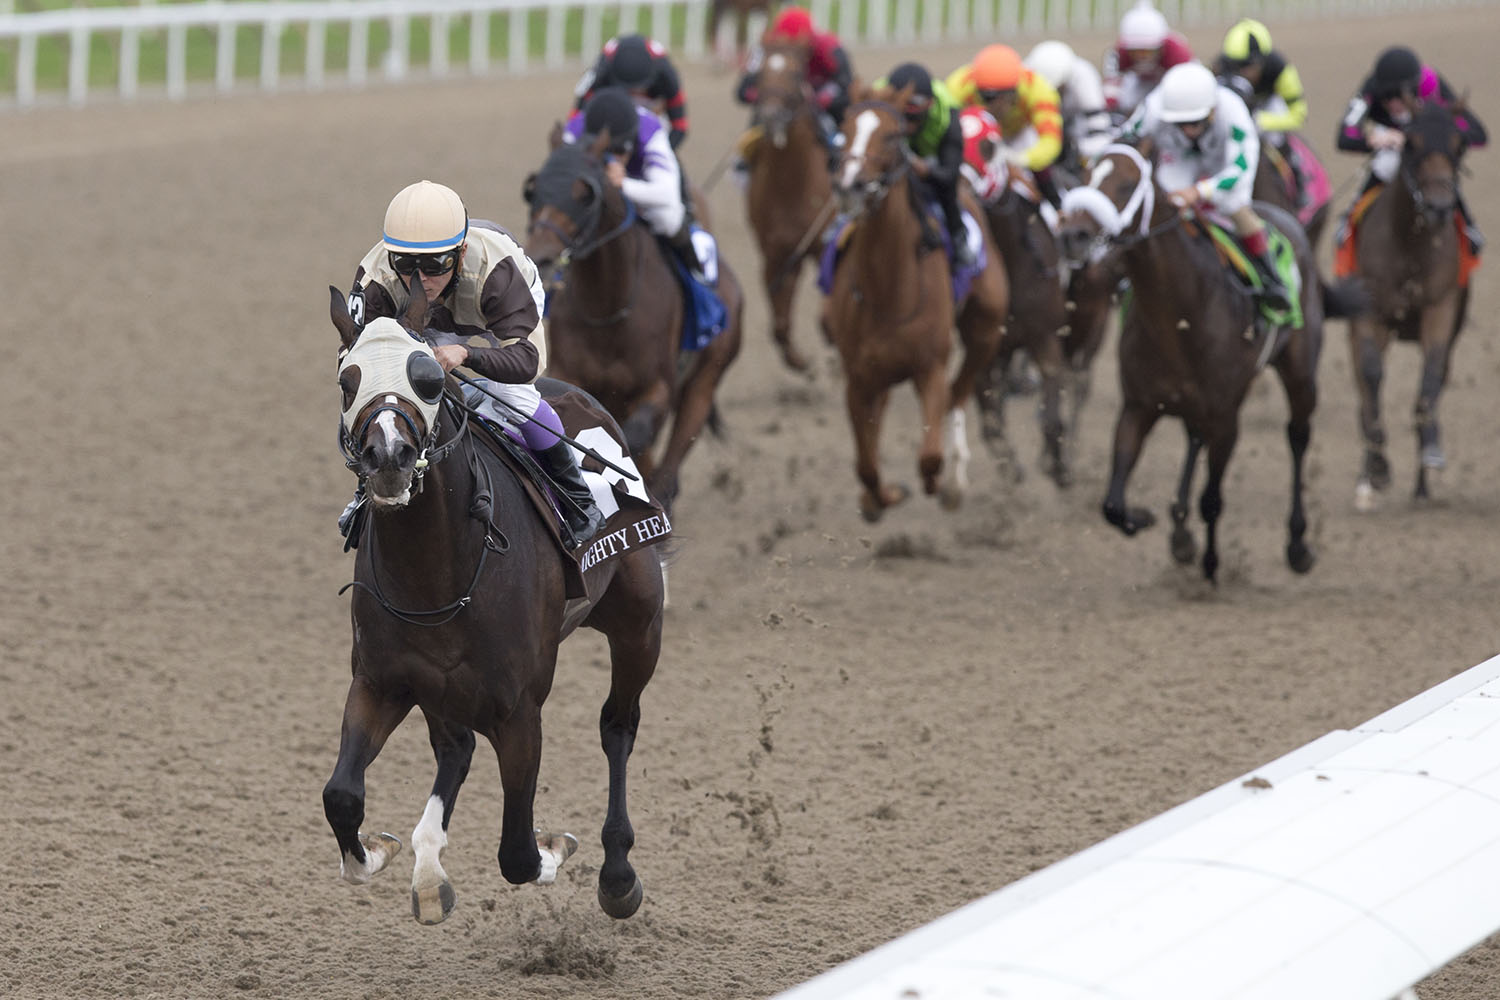 Mighty Heart winning the $1 million Queen’s Plate, first jewel of the OLG Canadian Triple Crown, on September 12 at Woodbine Racetrack. (Michael Burns Photo)